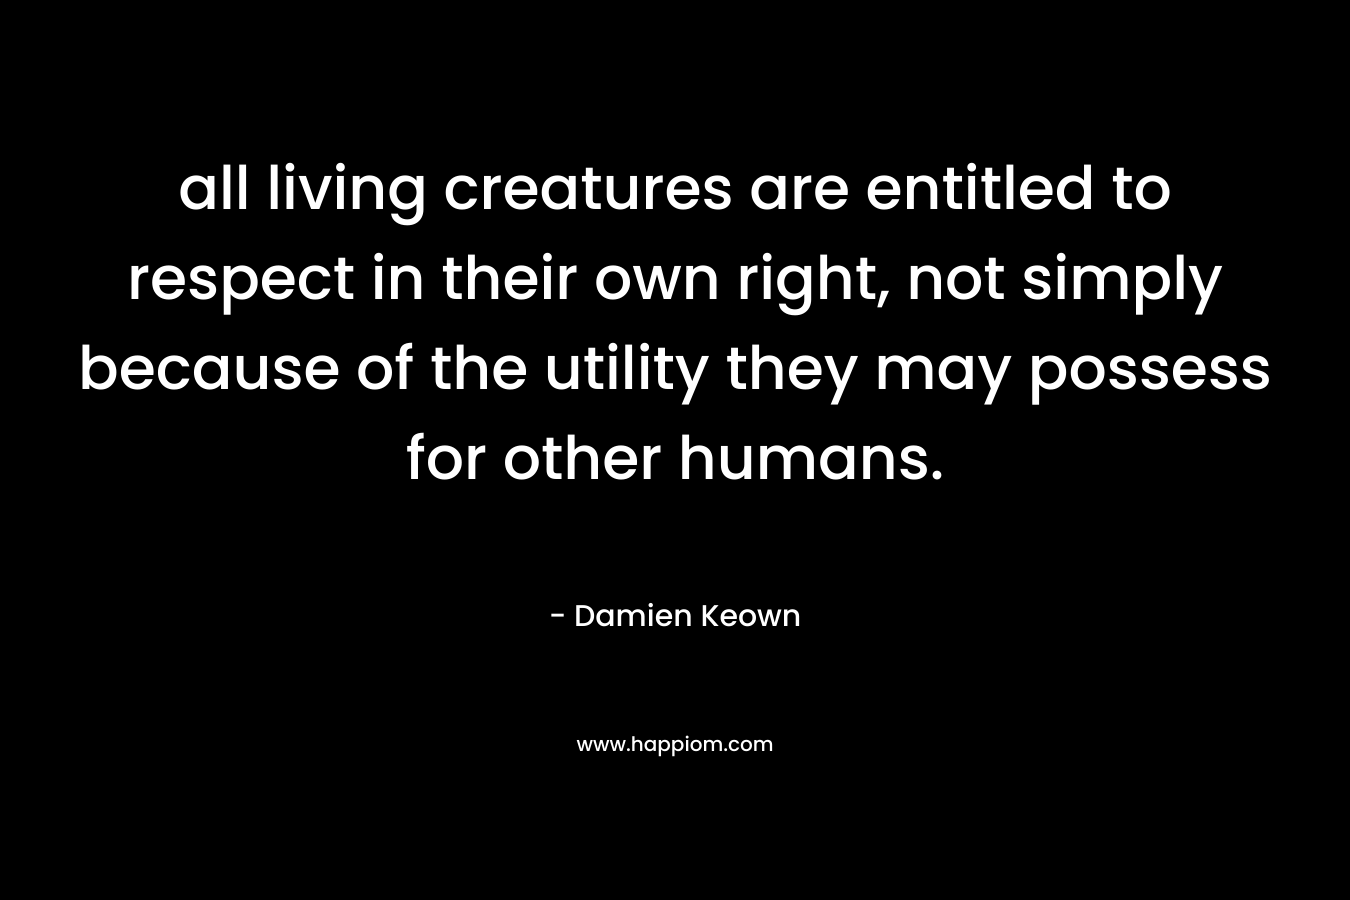 all living creatures are entitled to respect in their own right, not simply because of the utility they may possess for other humans. – Damien Keown